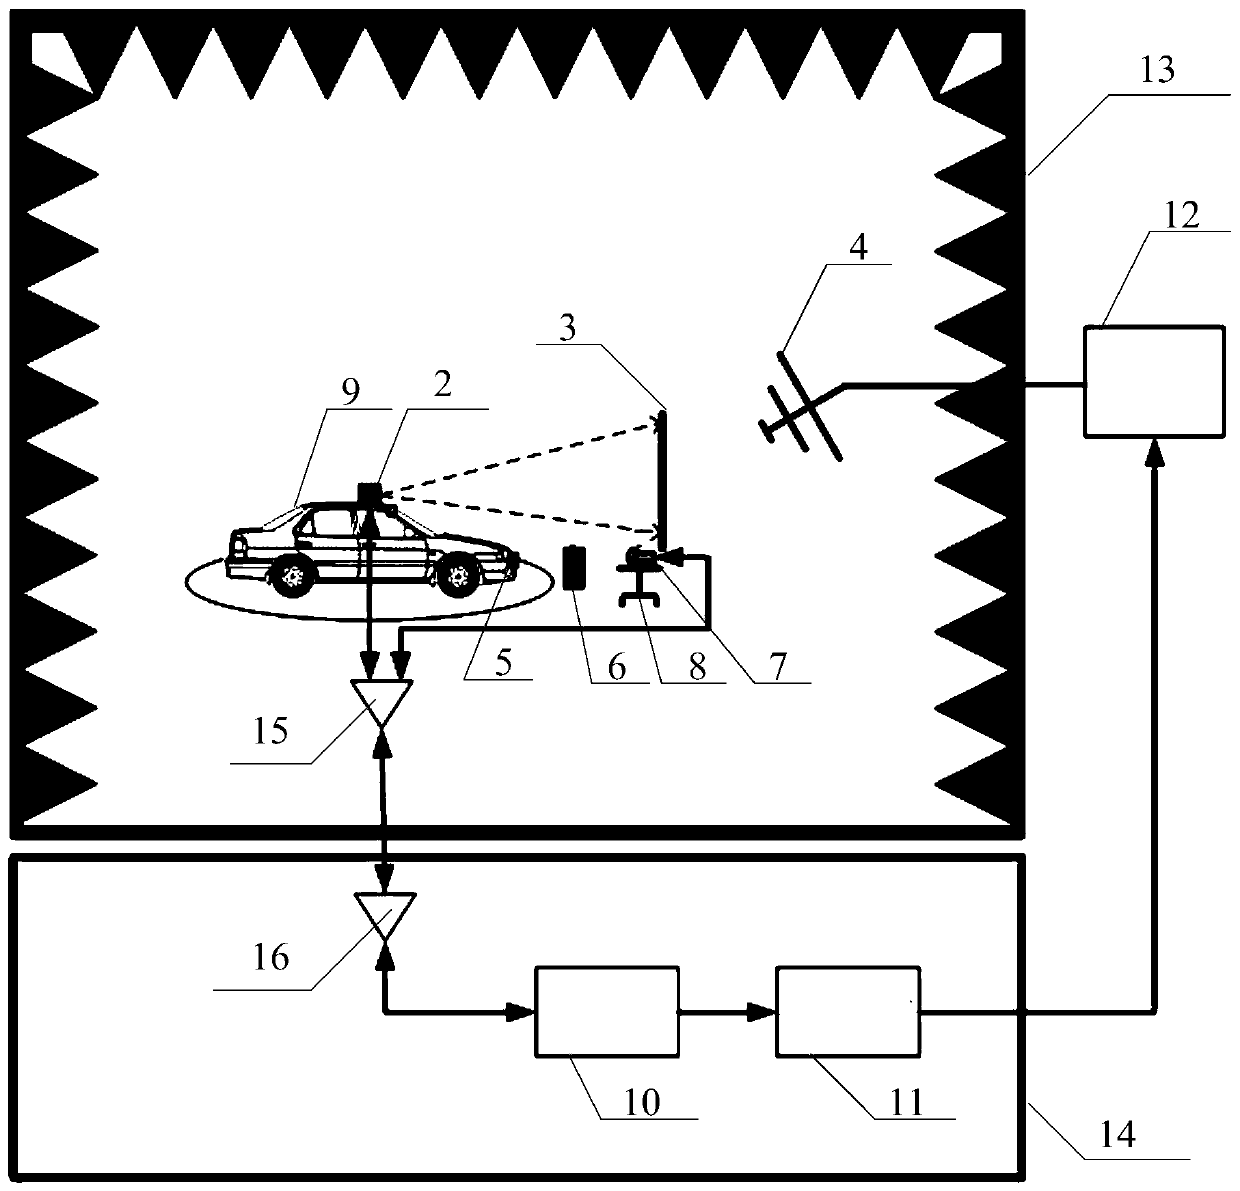 System used for testing electromagnetic anti-interference performance of vehicle-mounted integrated ADAS function